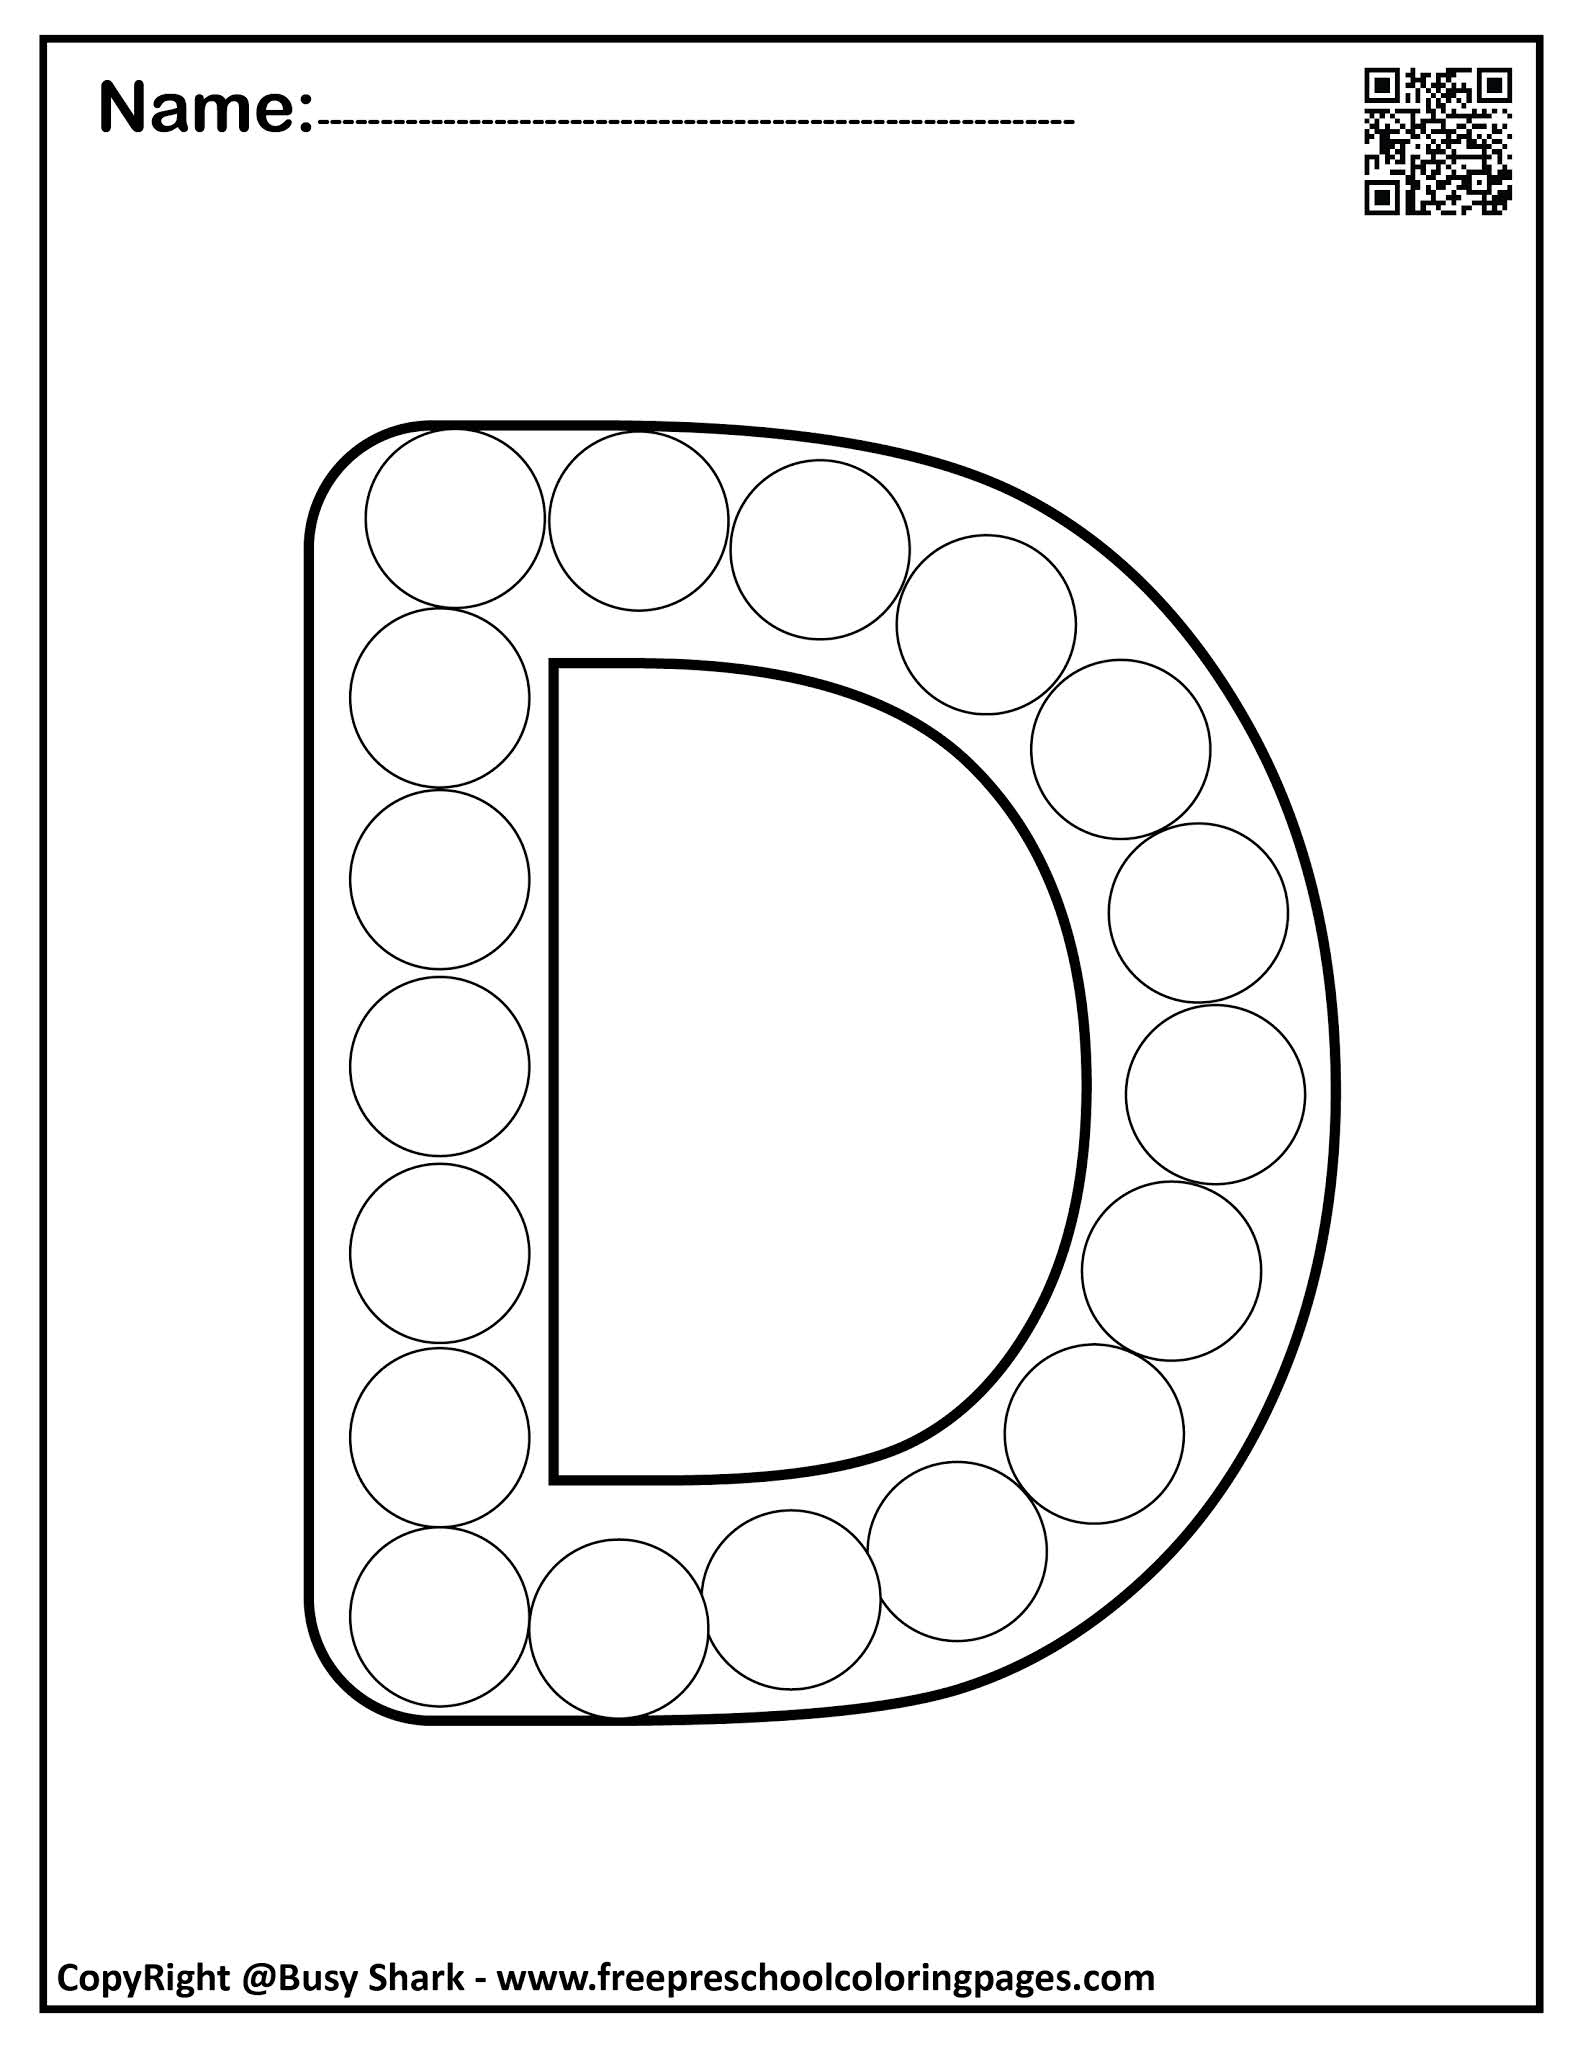 Set of Letter D "10 free Dot Markers coloring pages"